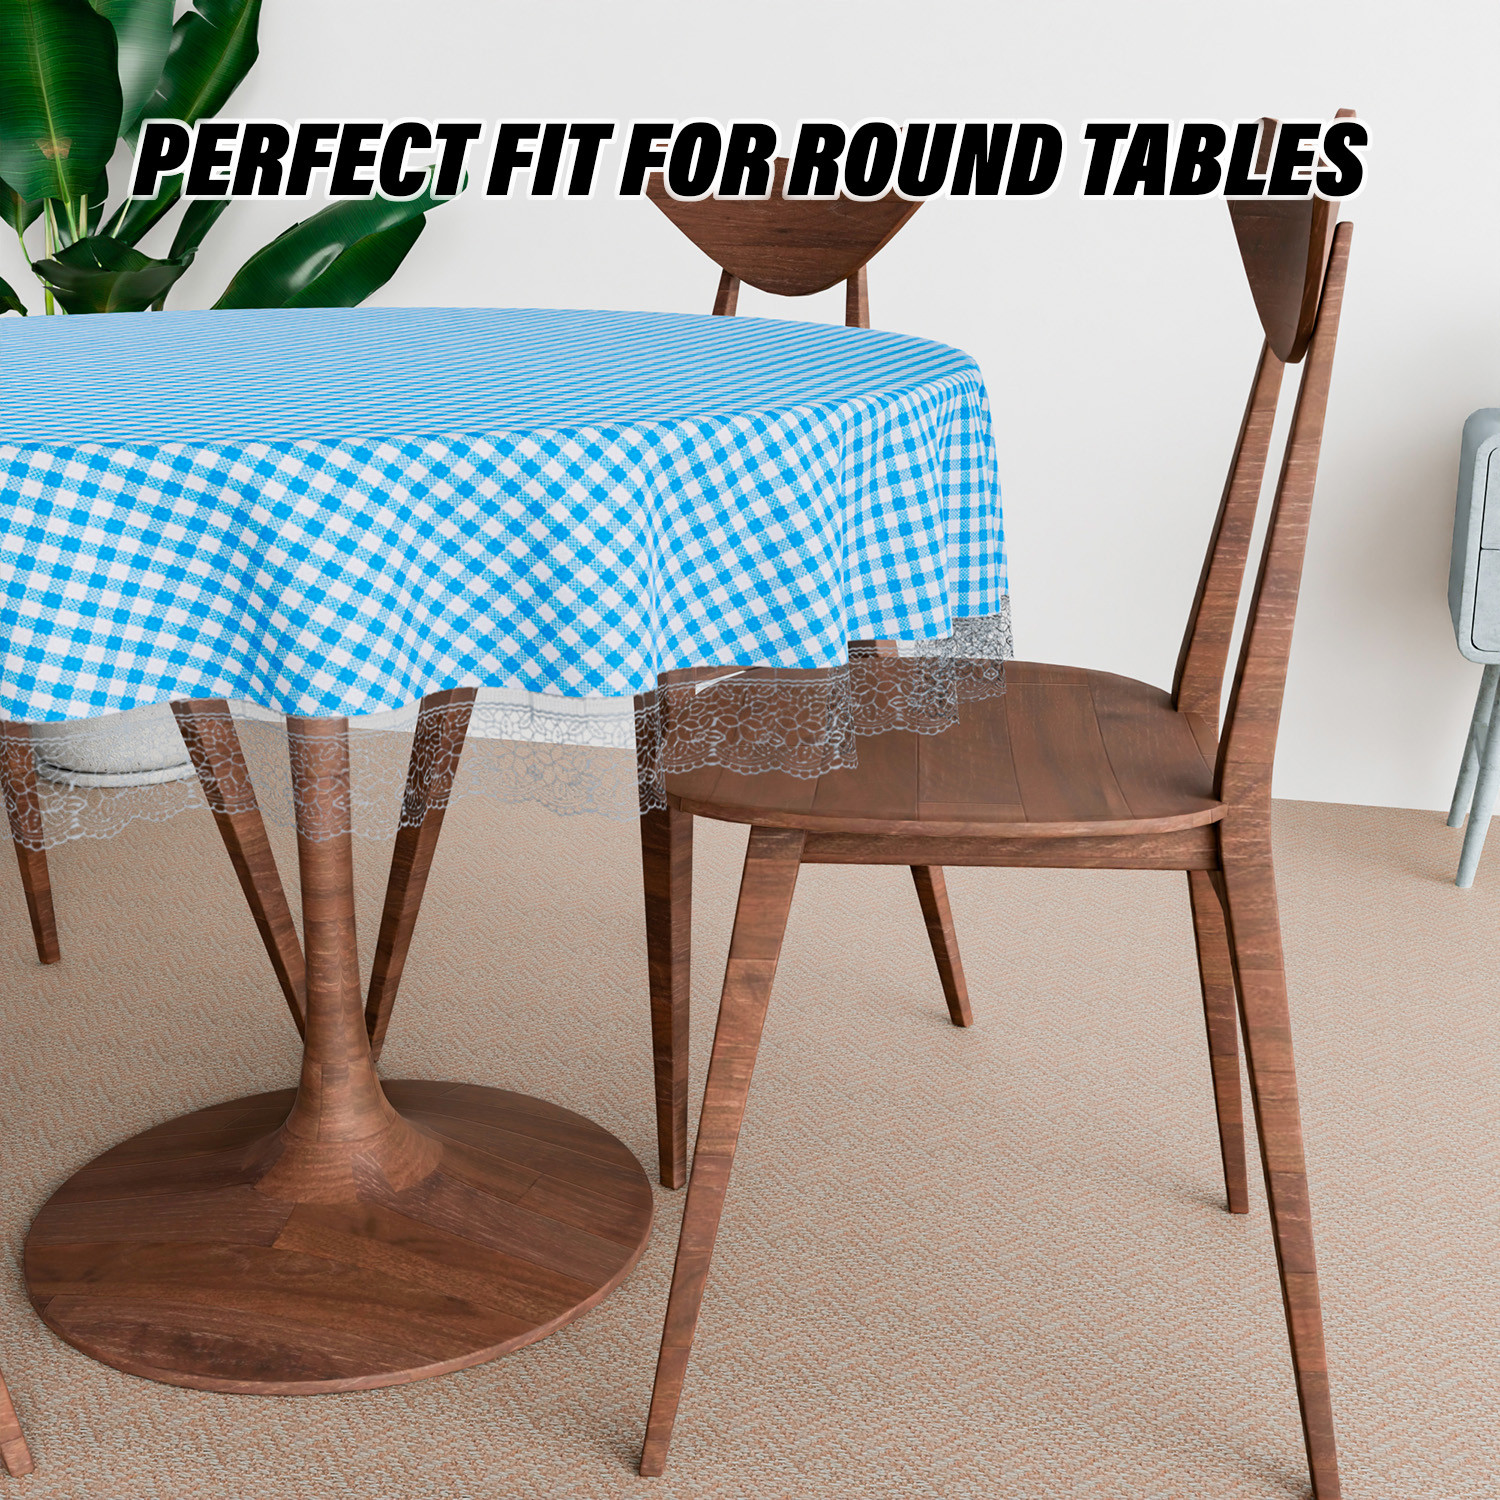 Kuber Industries Round Table Cover | Table Cloth for Round Tables | 4 Seater Round Table Cloth | Barik Check Kitchen Dining Tablecloth | Tabletop Cover | 60 Inch | Blue